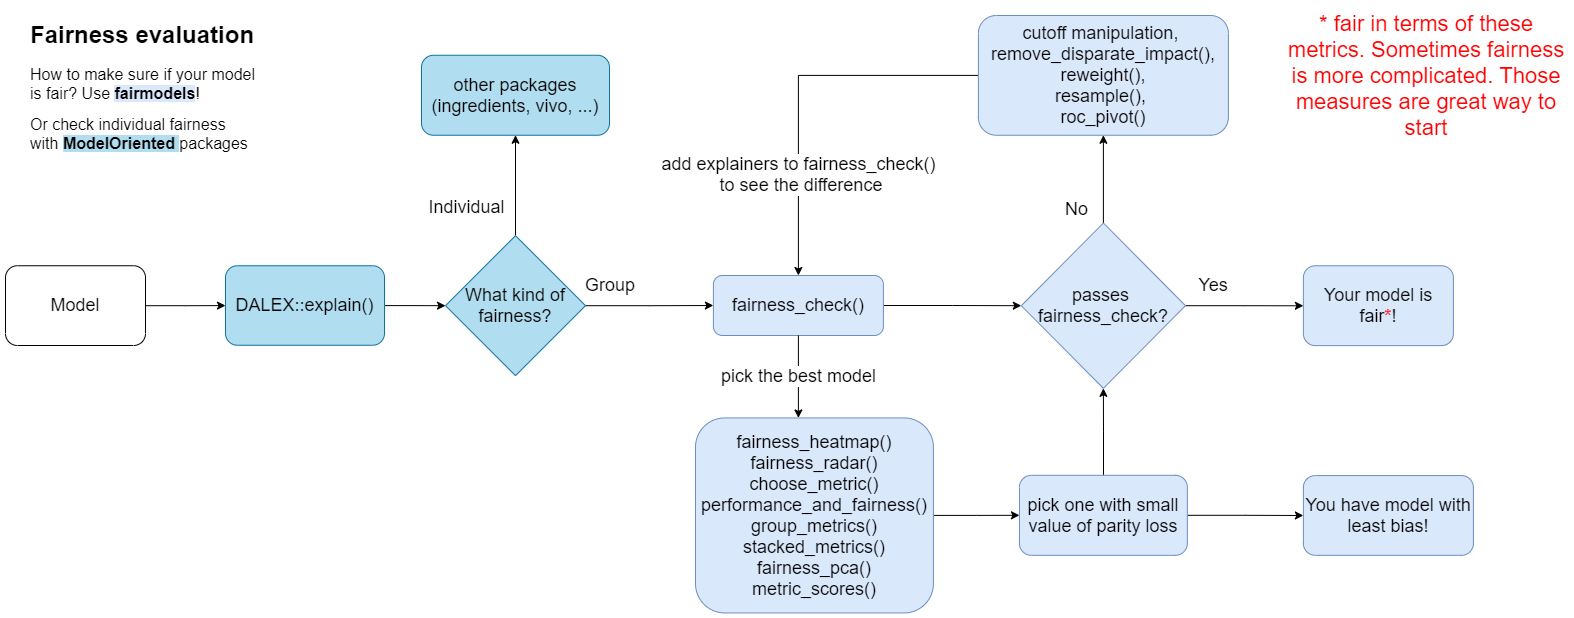 Flowchart for the fairness assessment with the fairmodels package. The arrows describe typical sequences of actions when exploring the fairness of the models. For ease of use, the names of the functions that can be used in a given step are indicated. Note that this procedure is intended to look at the model from multiple perspectives in order to track down potential problems in the model. Merely satisfying the fairness criteria does not automatically mean that the model is free of any errors